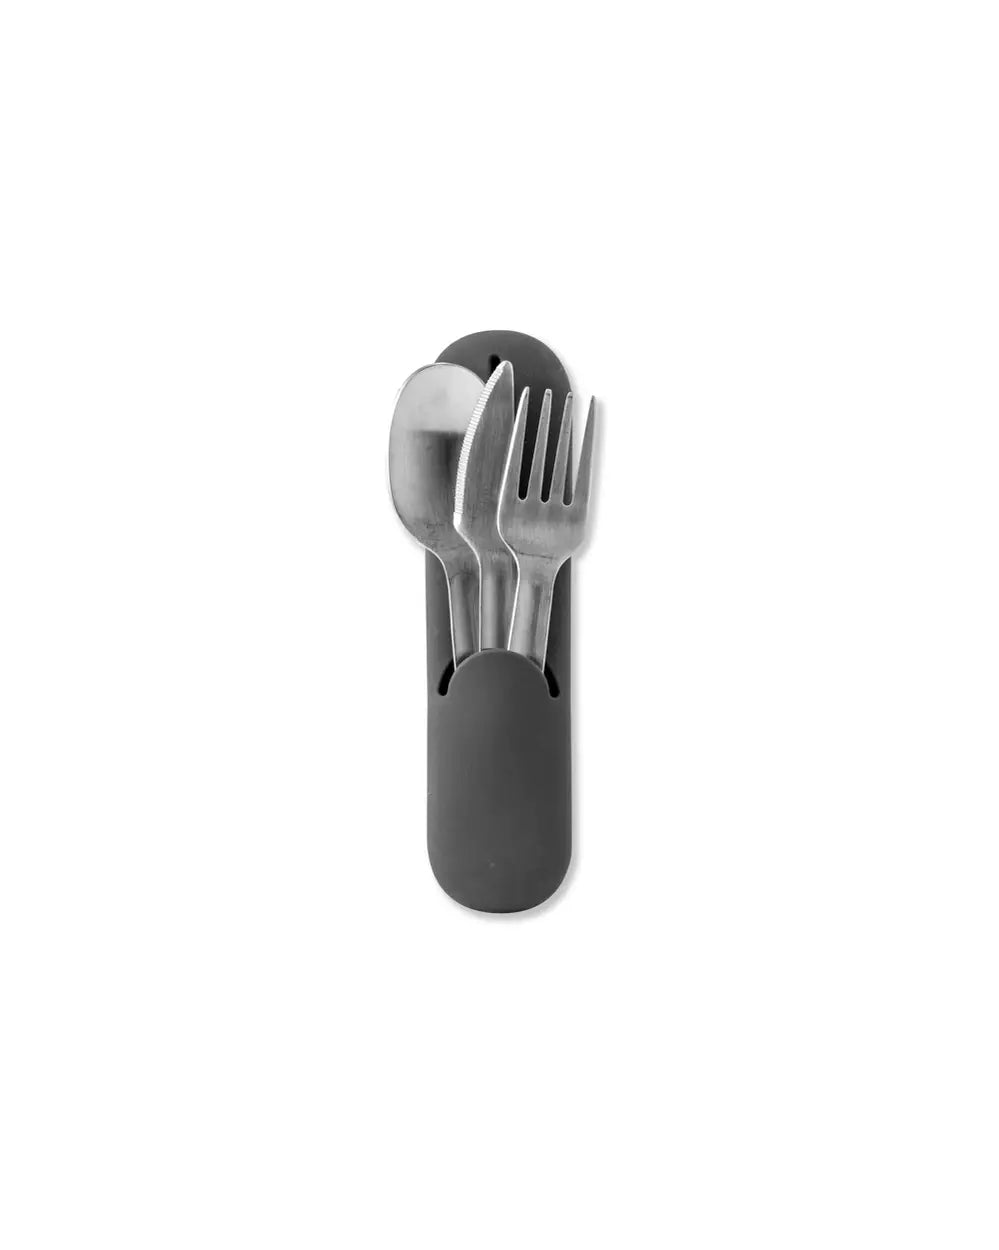 Travel Utensil Set with Silicone Case